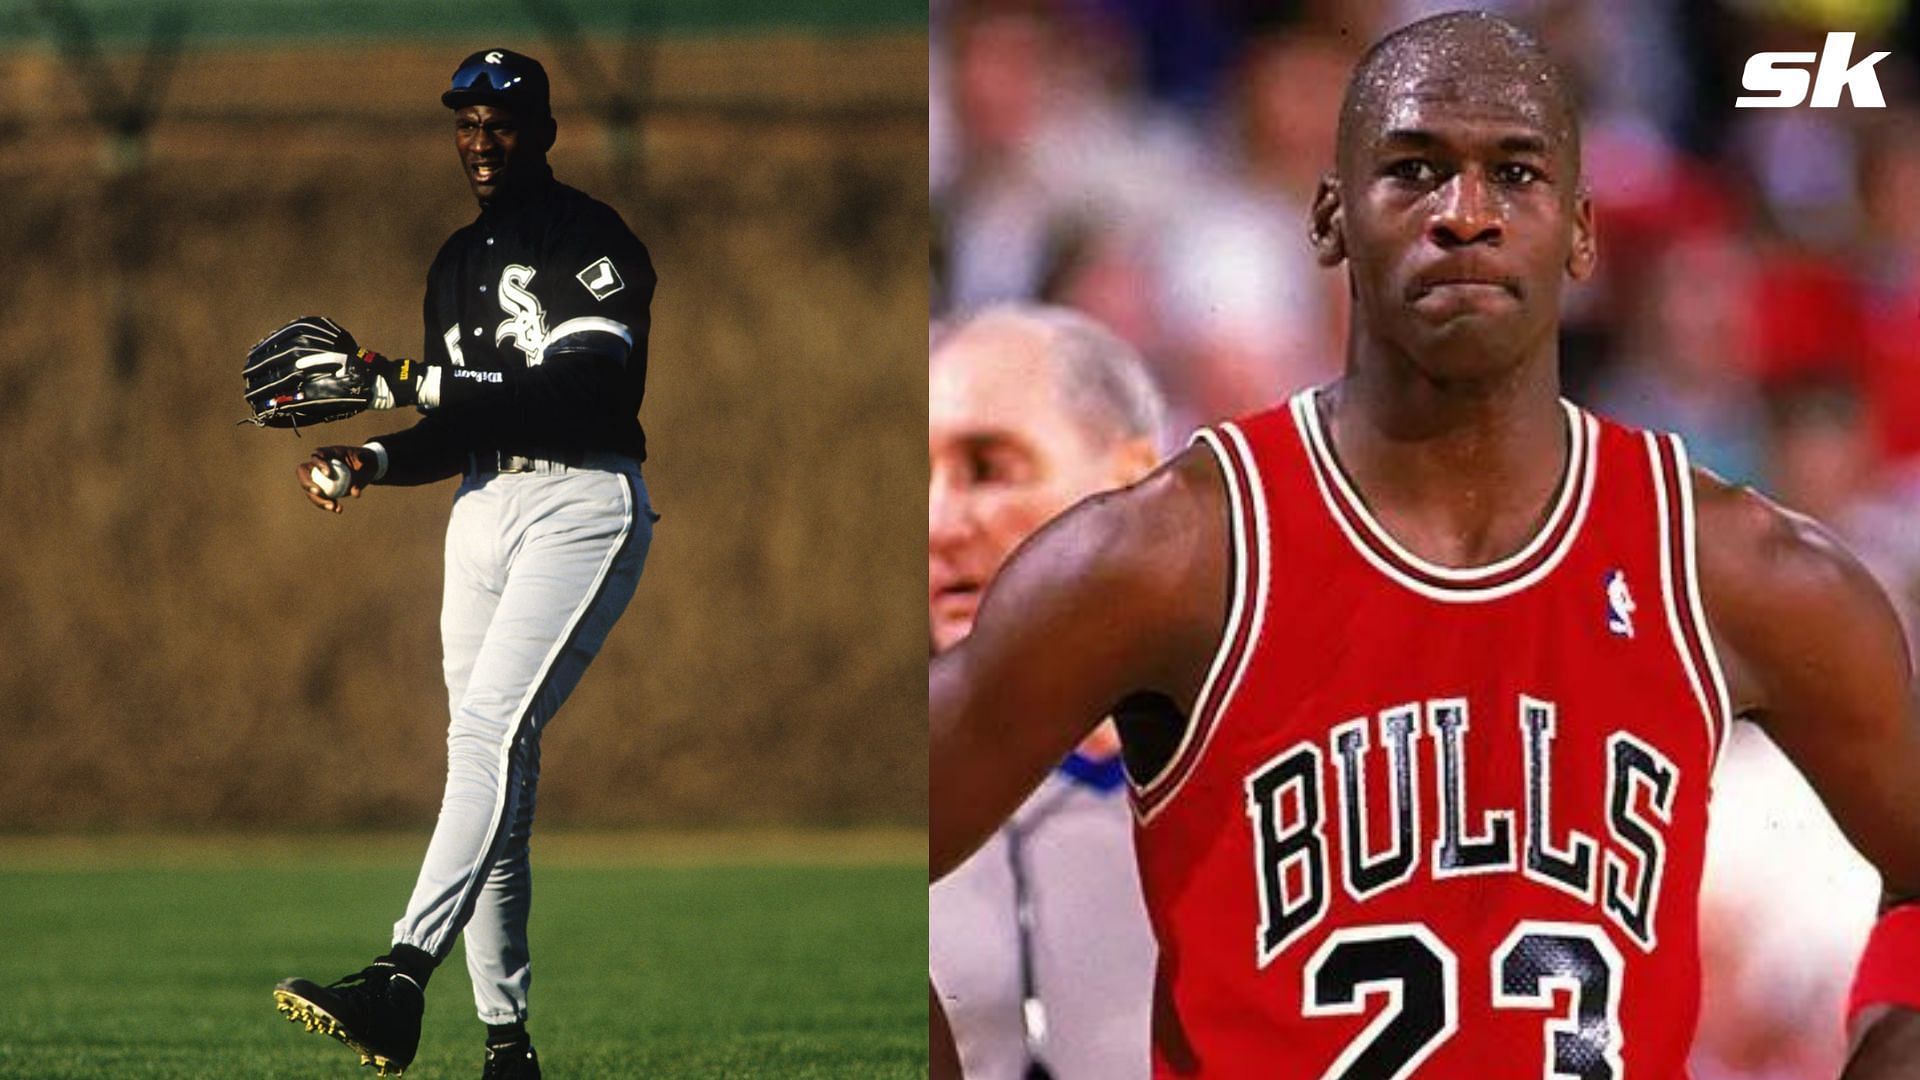 From 3x NBA champion to Chicago White Sox outfielder: The emotional story  of Michael Jordan's short-lived career switch to baseball